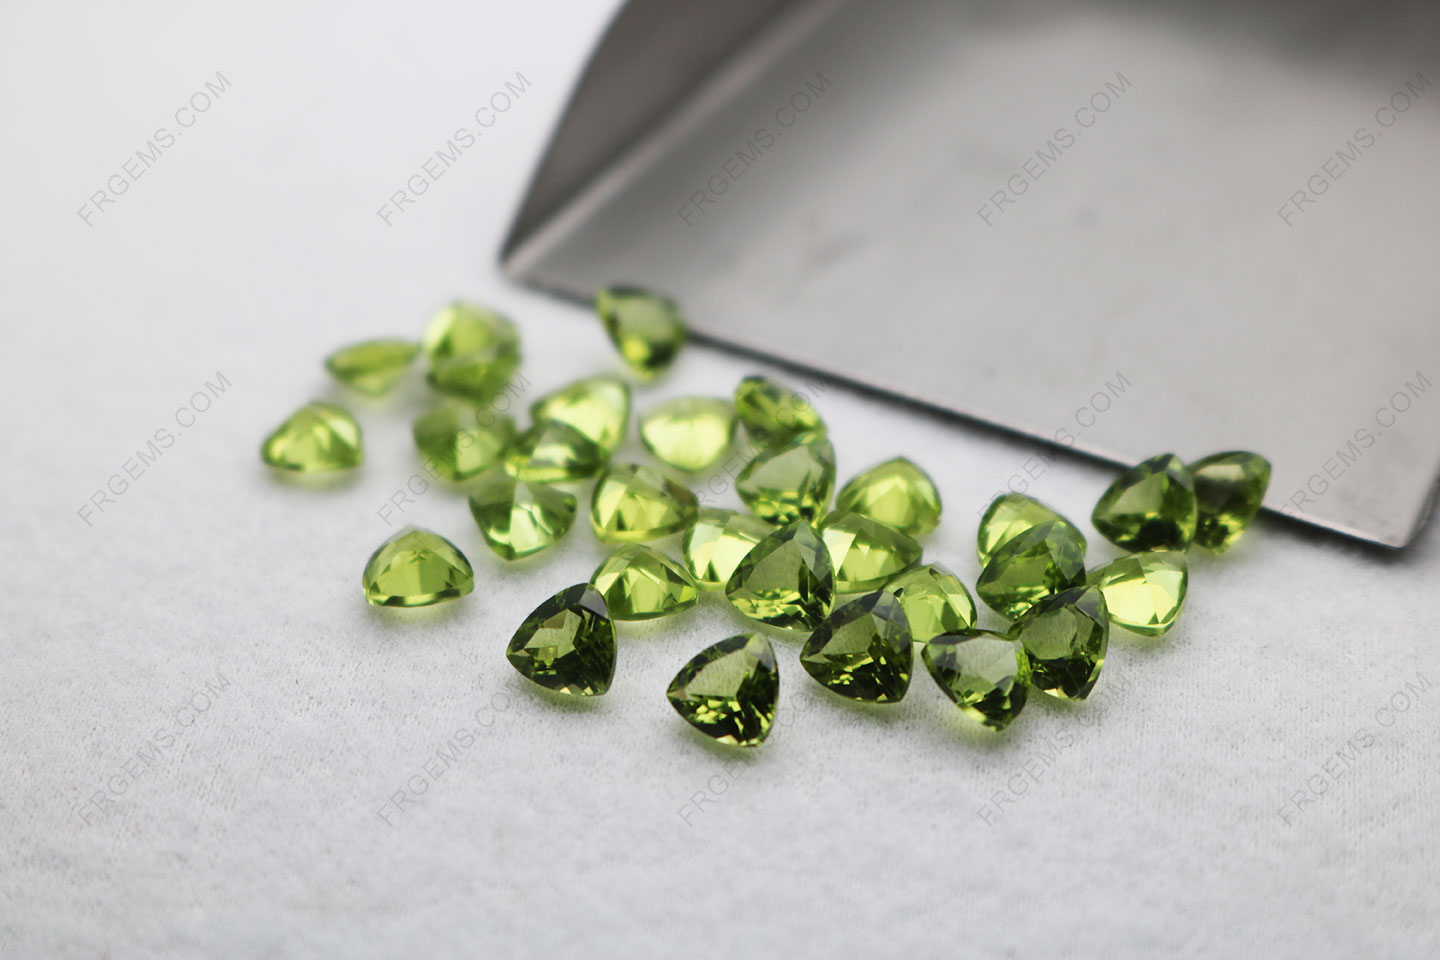 Natural genuine Peridot Color Trillion faceted 6x6mm Gemstones wholesale from China Supplier